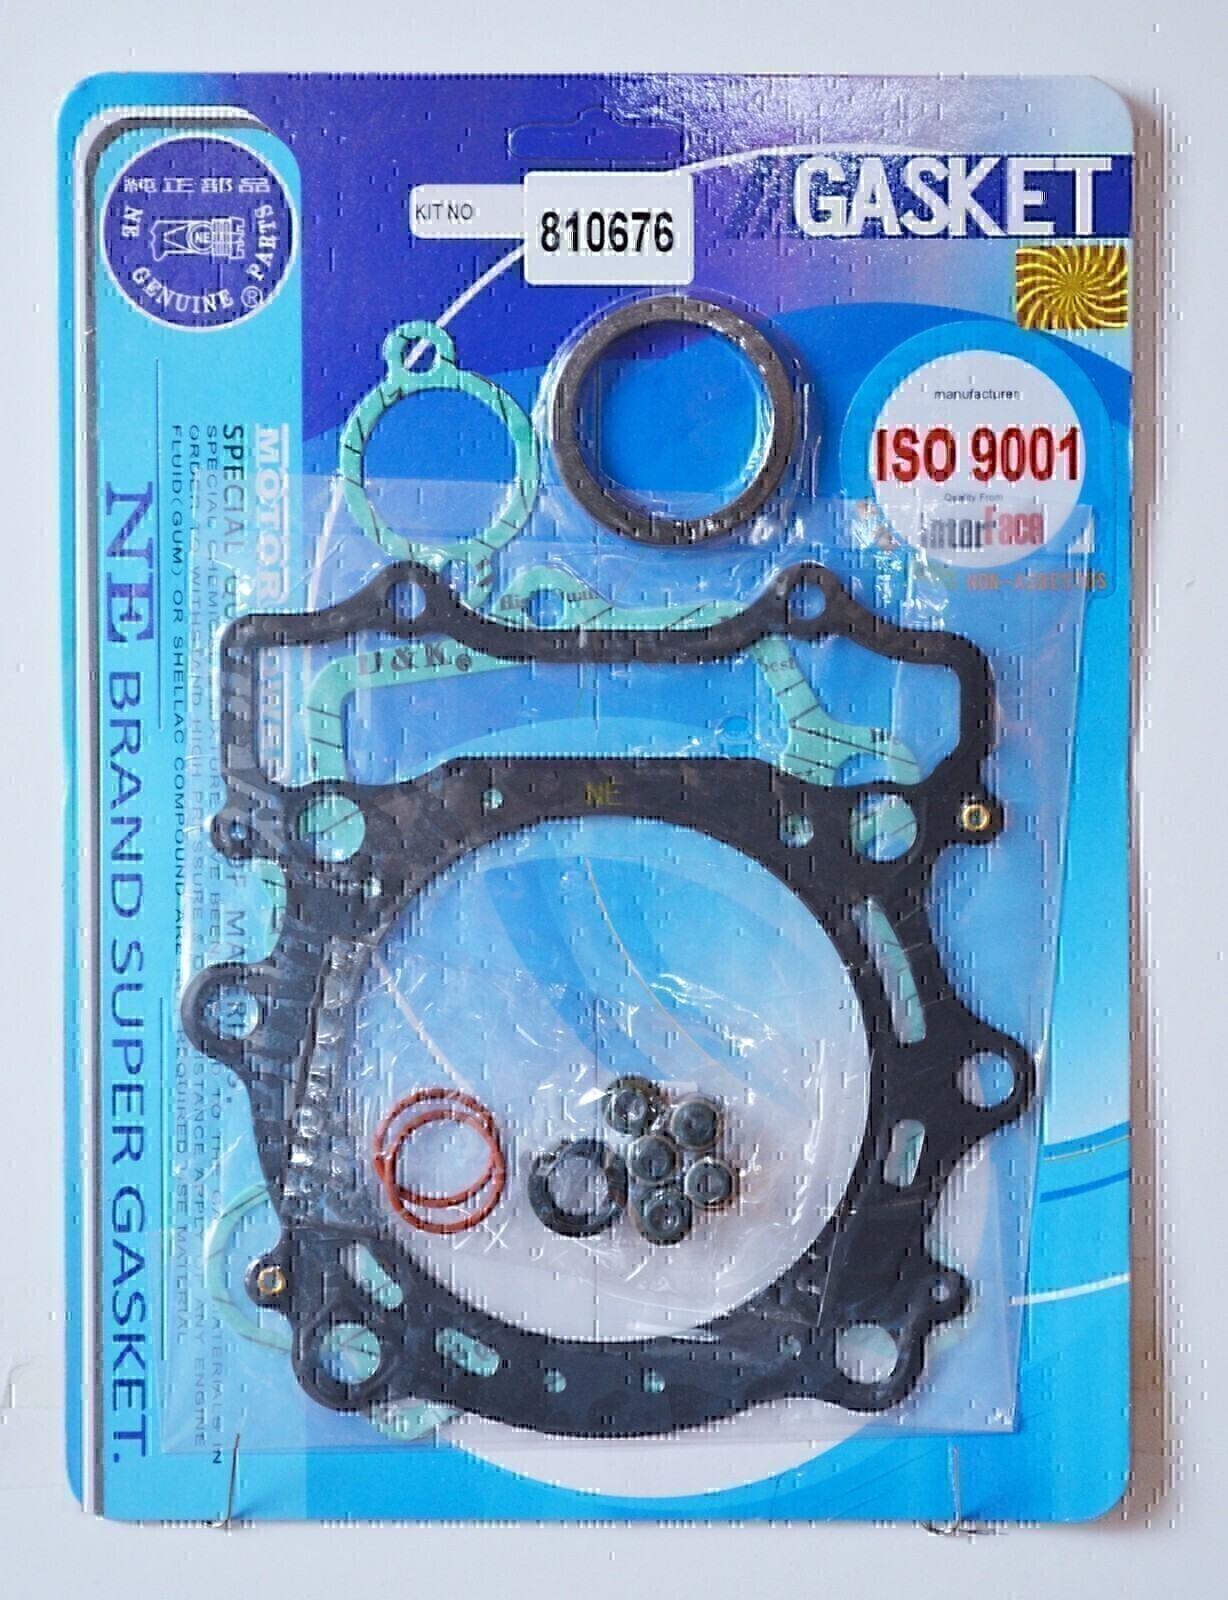 TOP END GASKET KIT FOR YAMAHA WR400F 2000 YZ426F 2000 - 2002 WR426F 2001 - 2002